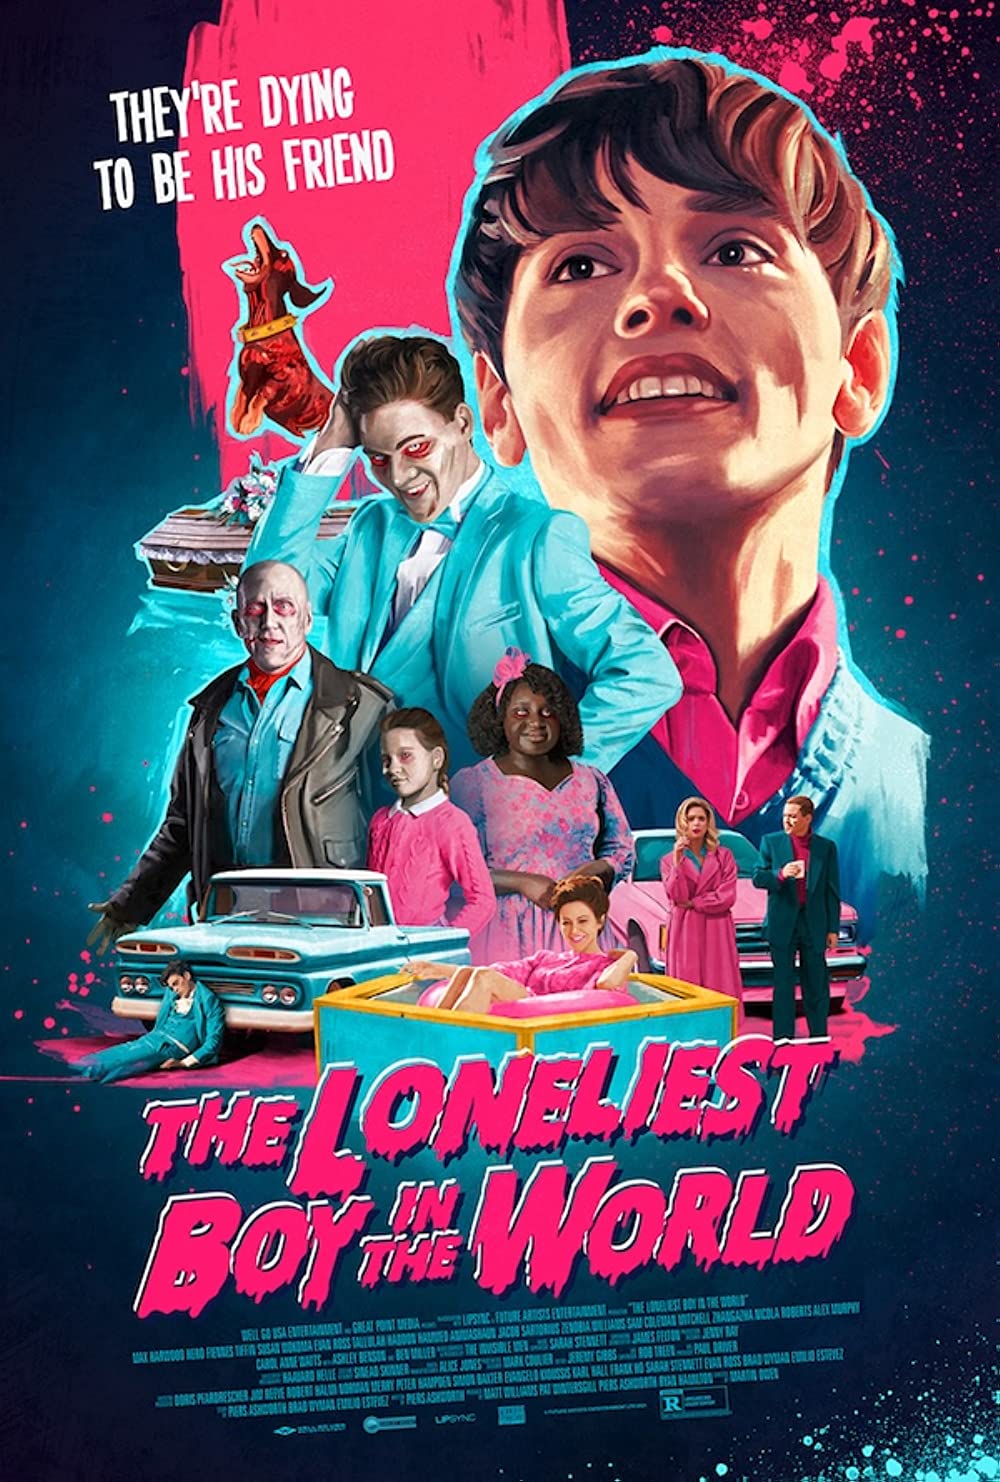  The Loneliest Boy in the World Movie 2022, Official Trailer